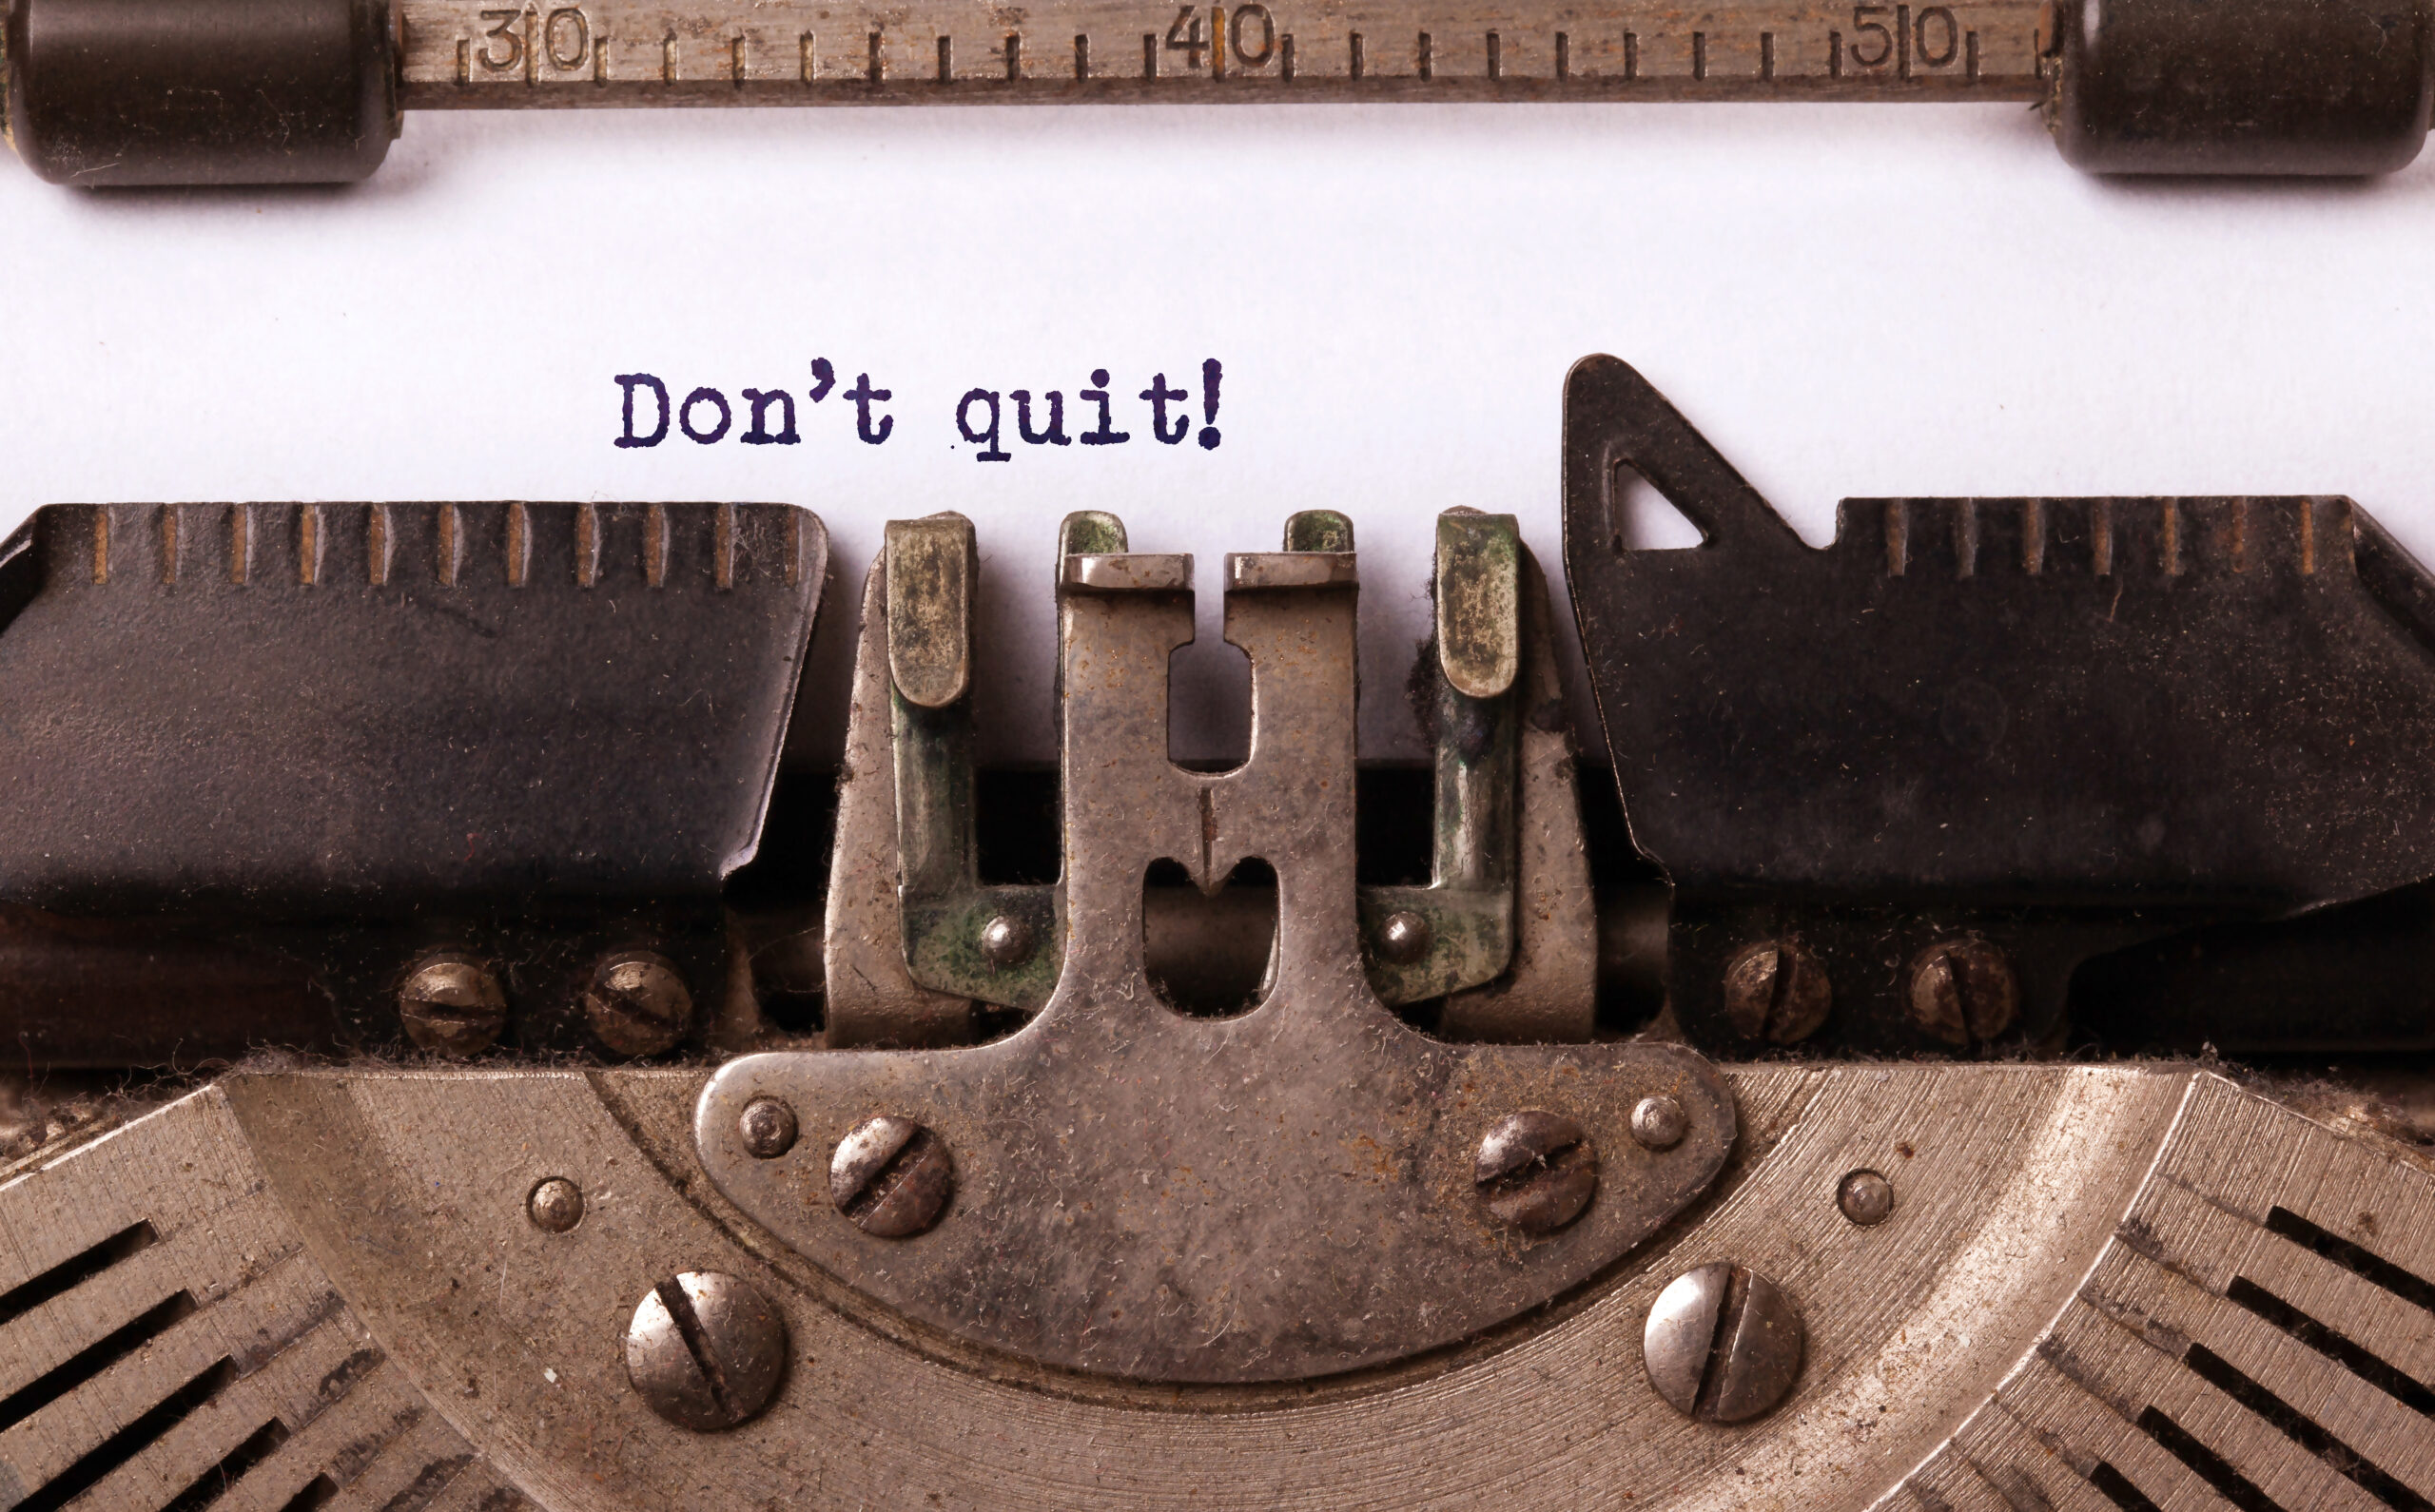 The words "don't quit" are written on paper in a typewriter. Don't just quit whenever you feel like quitting.